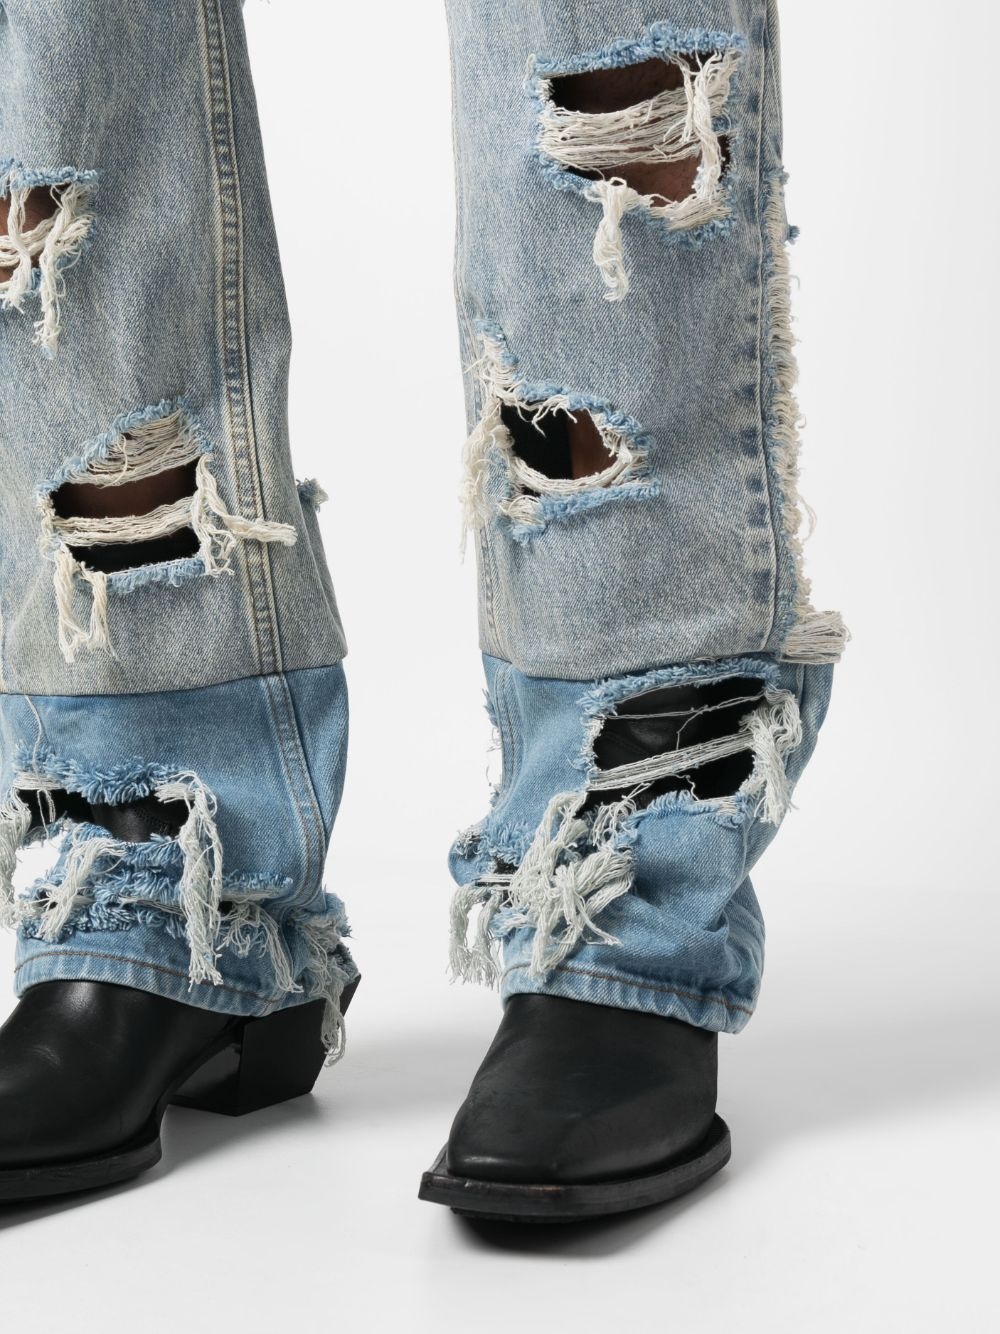 Gnarly distressed jeans - 5